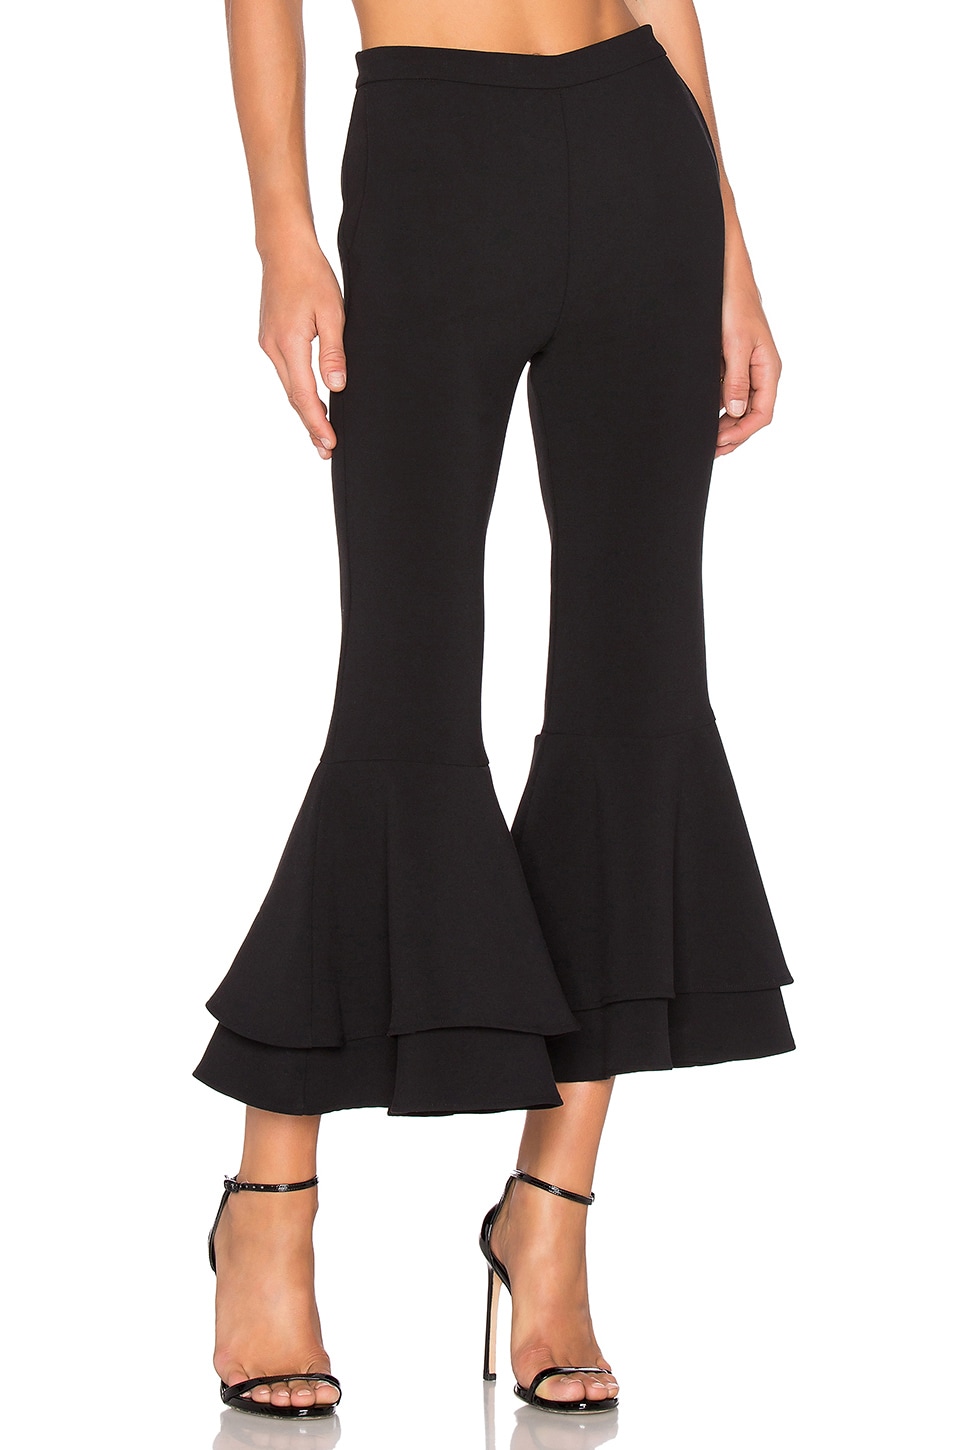 Backstage x REVOLVE Supafly Crop Double Ruffle Pant in Black | REVOLVE